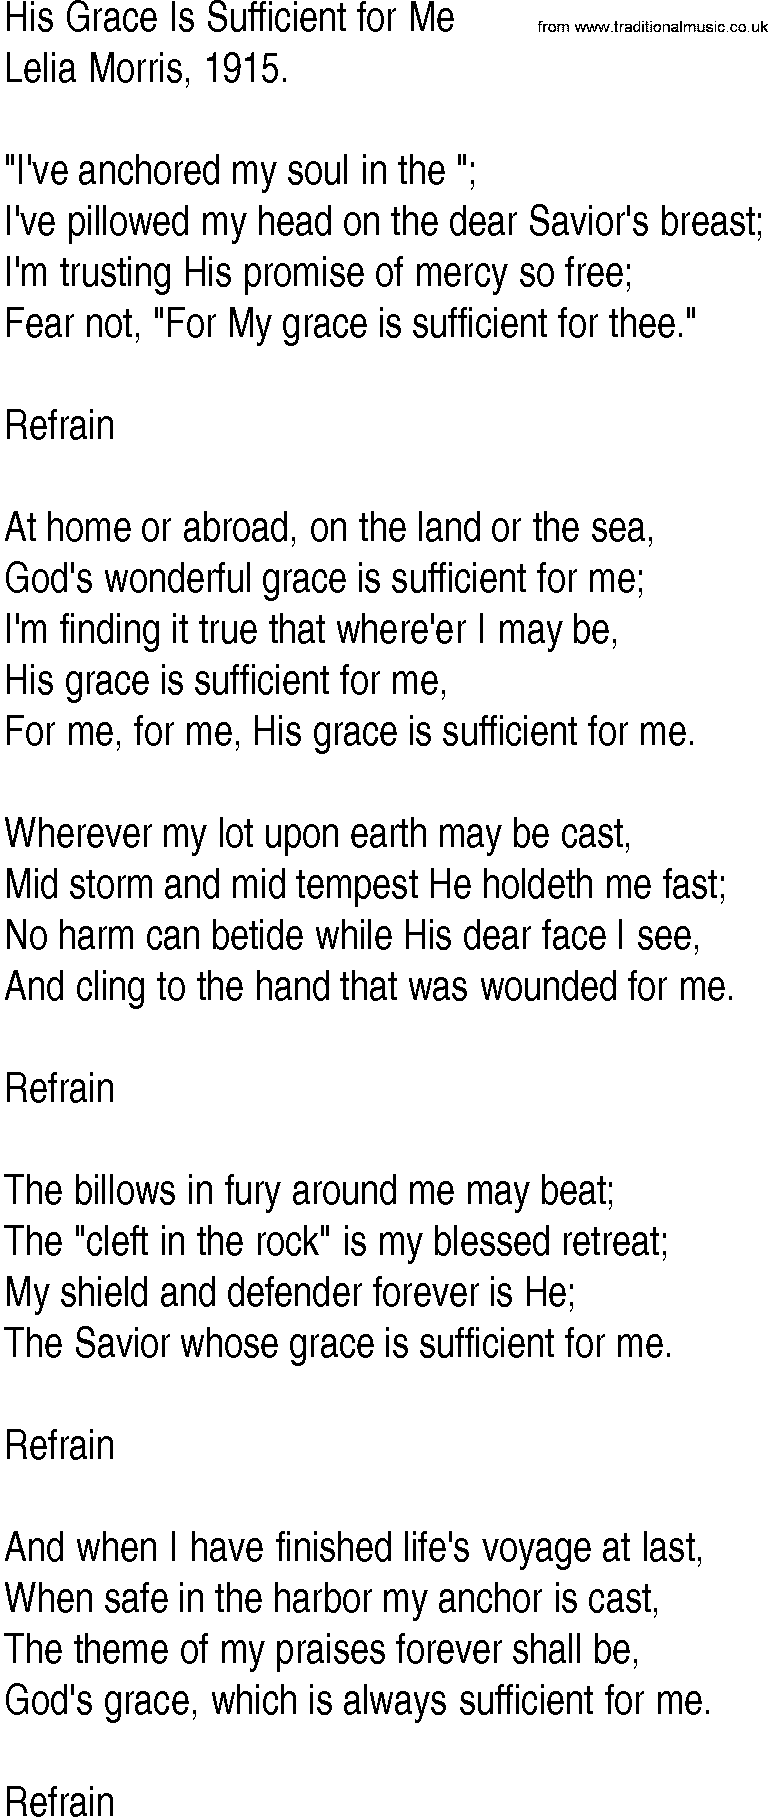 Hymn and Gospel Song: His Grace Is Sufficient for Me by Lelia Morris lyrics